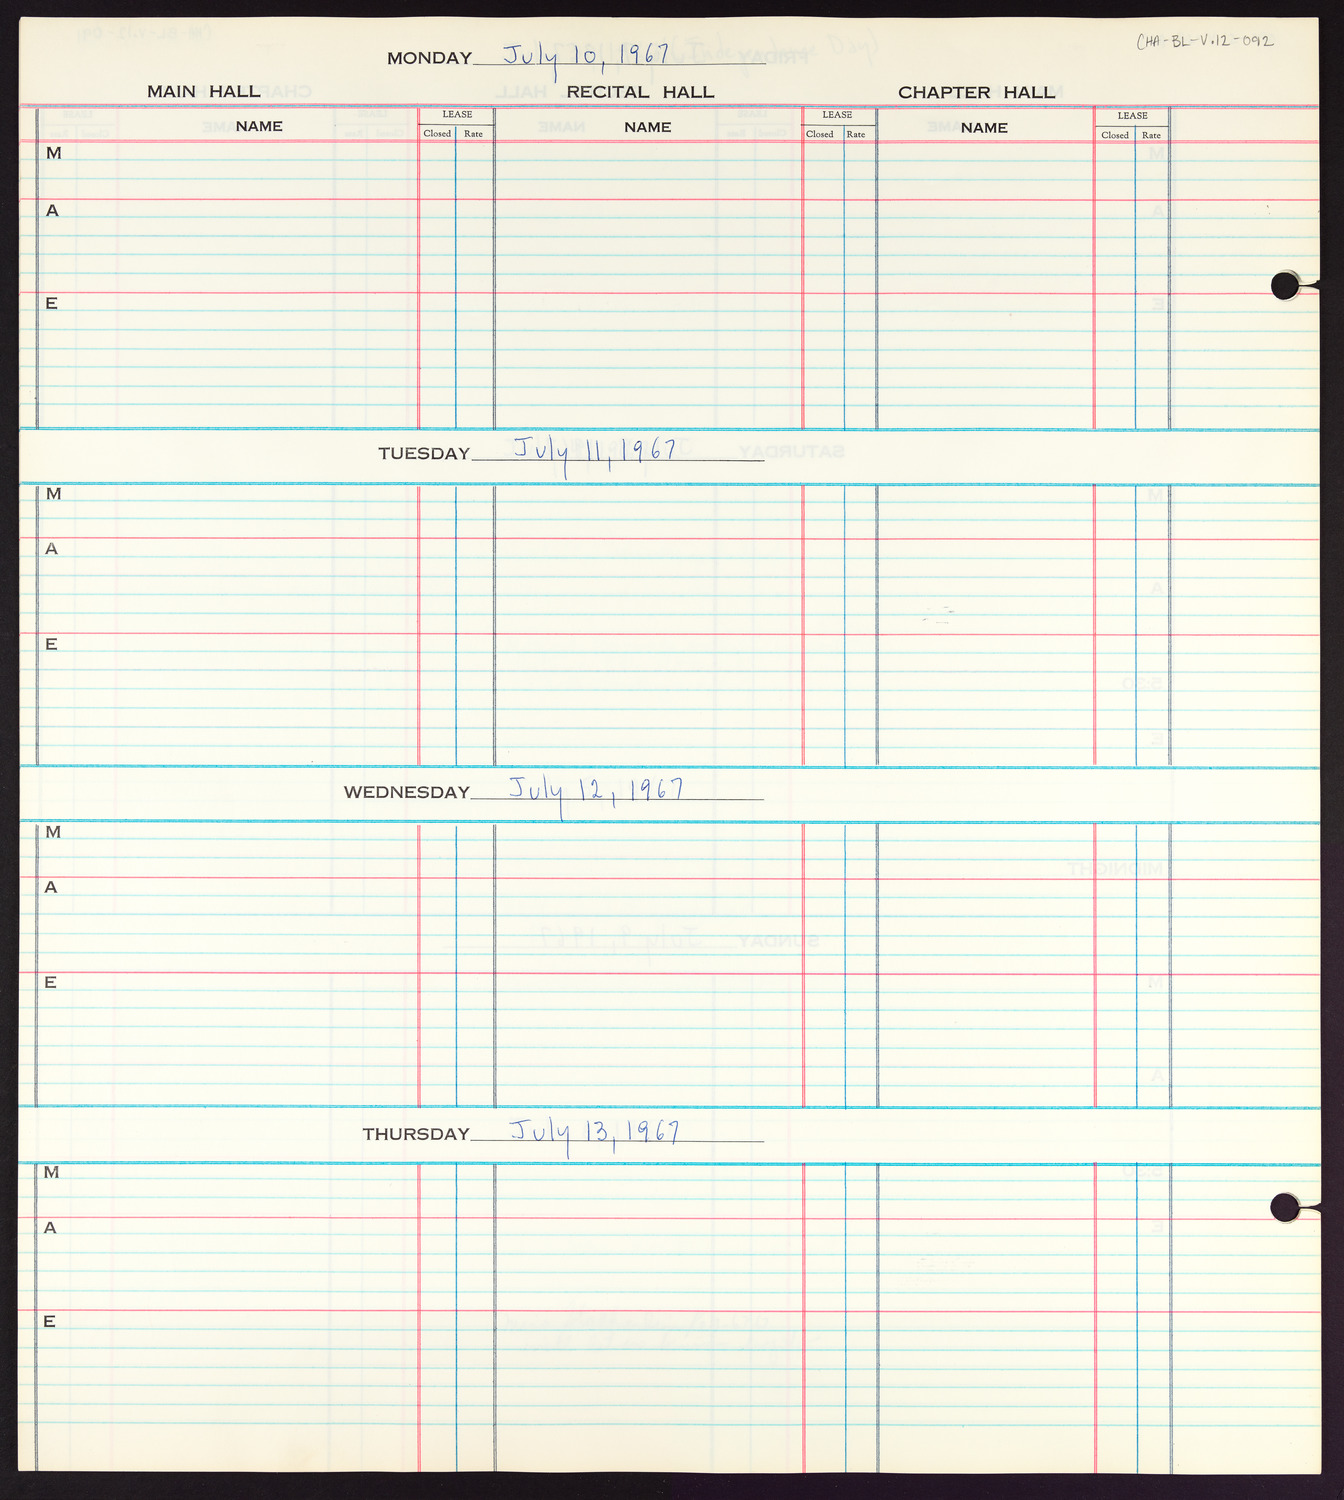 Carnegie Hall Booking Ledger, volume 12, page 92